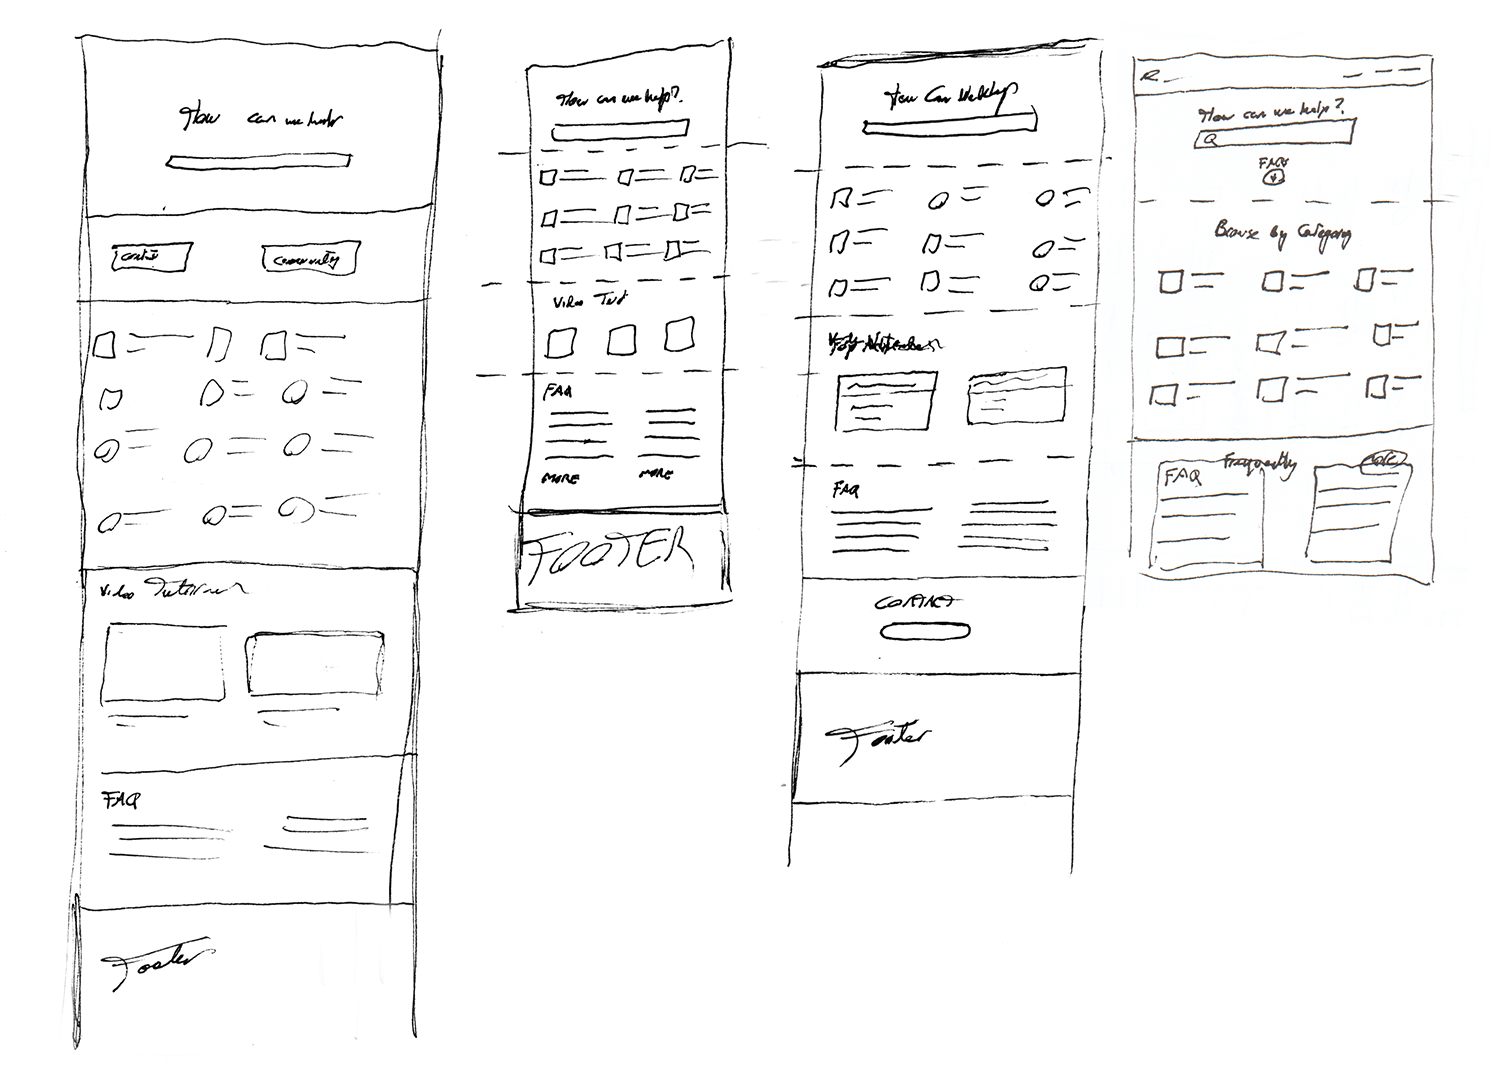 Wireframes showing the development of the interface on desktop